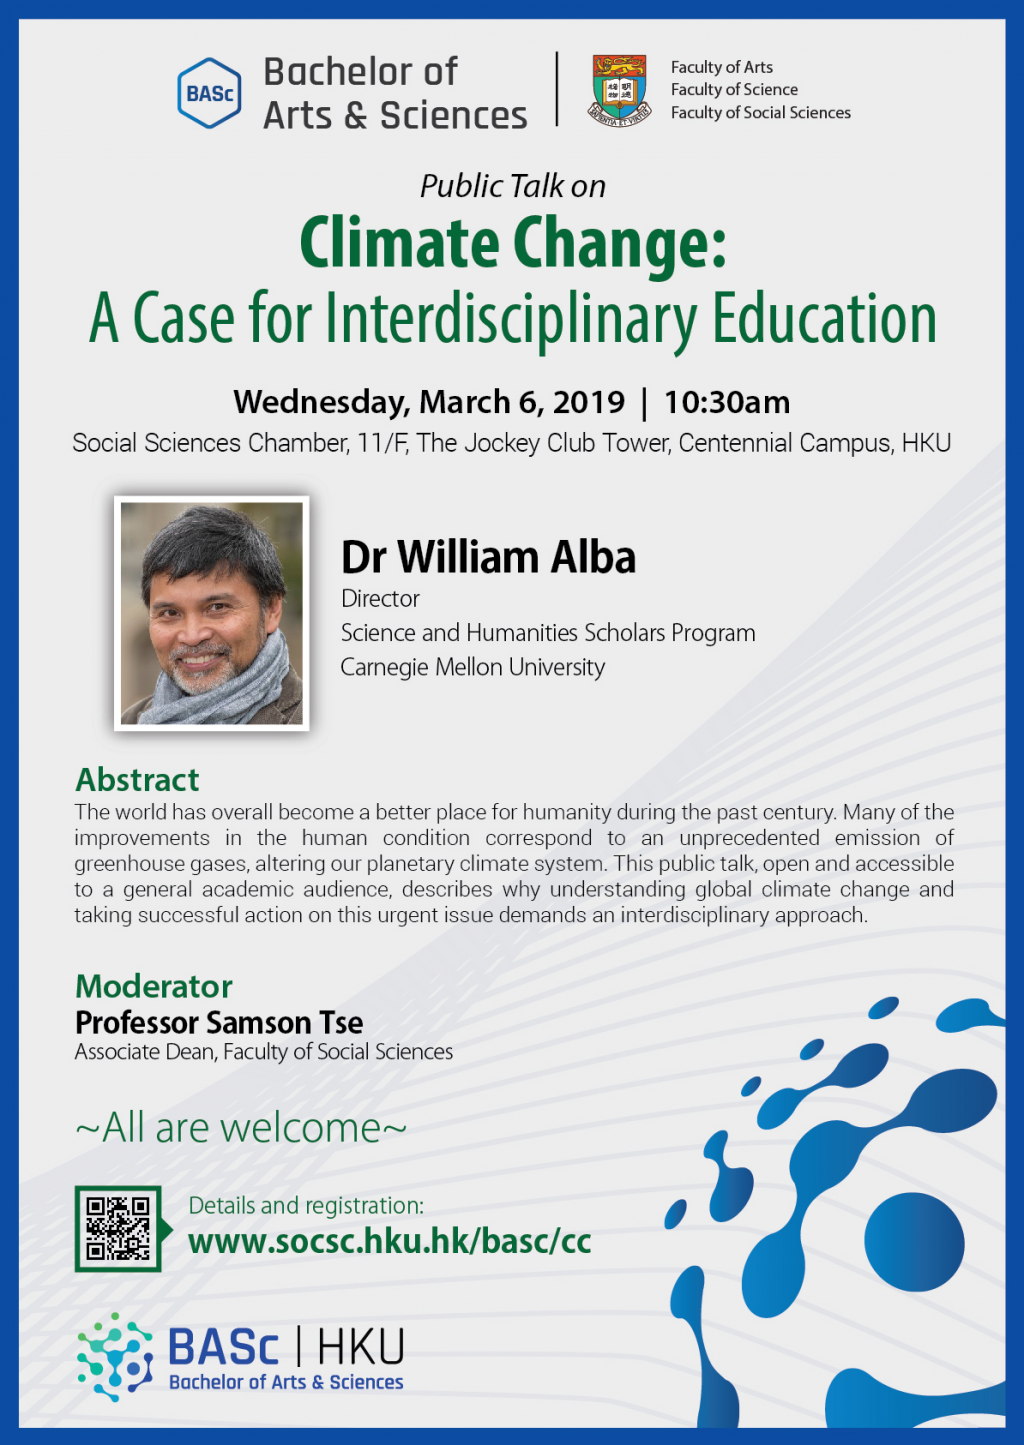 Public Talk on Climate Change: A Case for Interdisciplinary Education